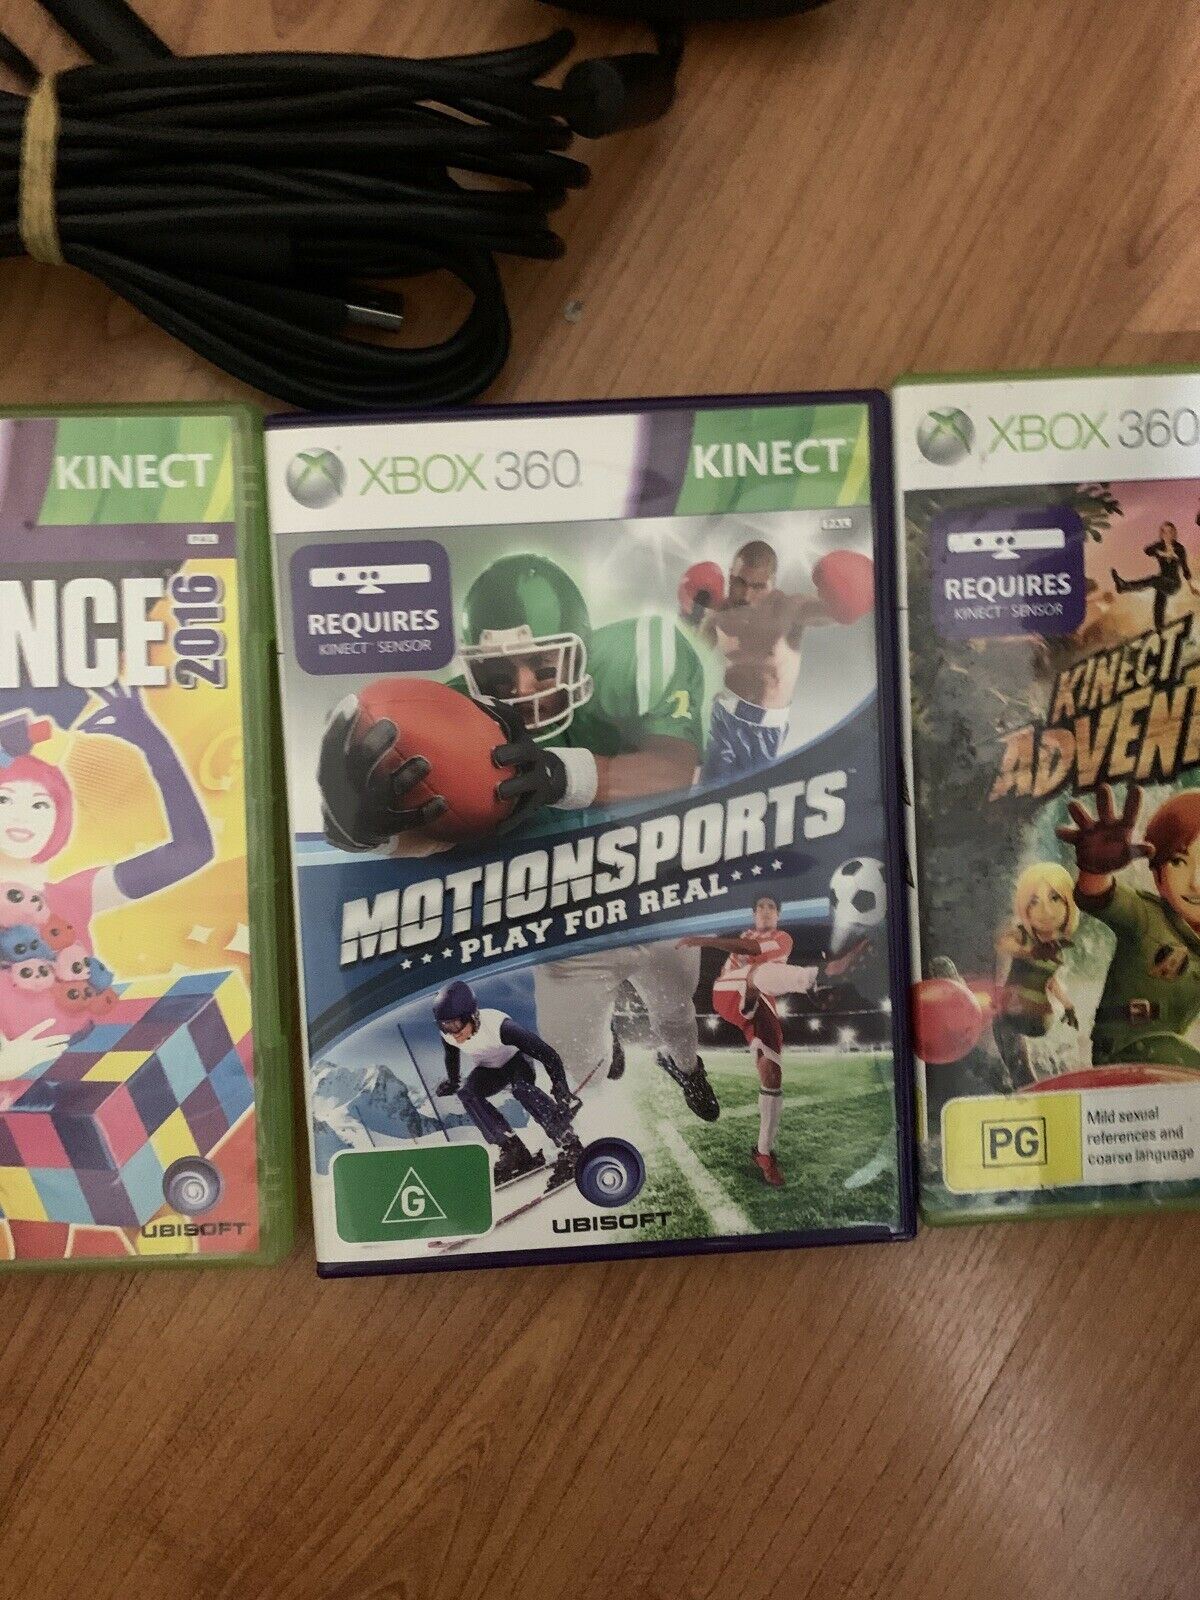 Just Dance 2016, Kinect Adventures, Motion Sports Play + Kinect Camera Xbox 360